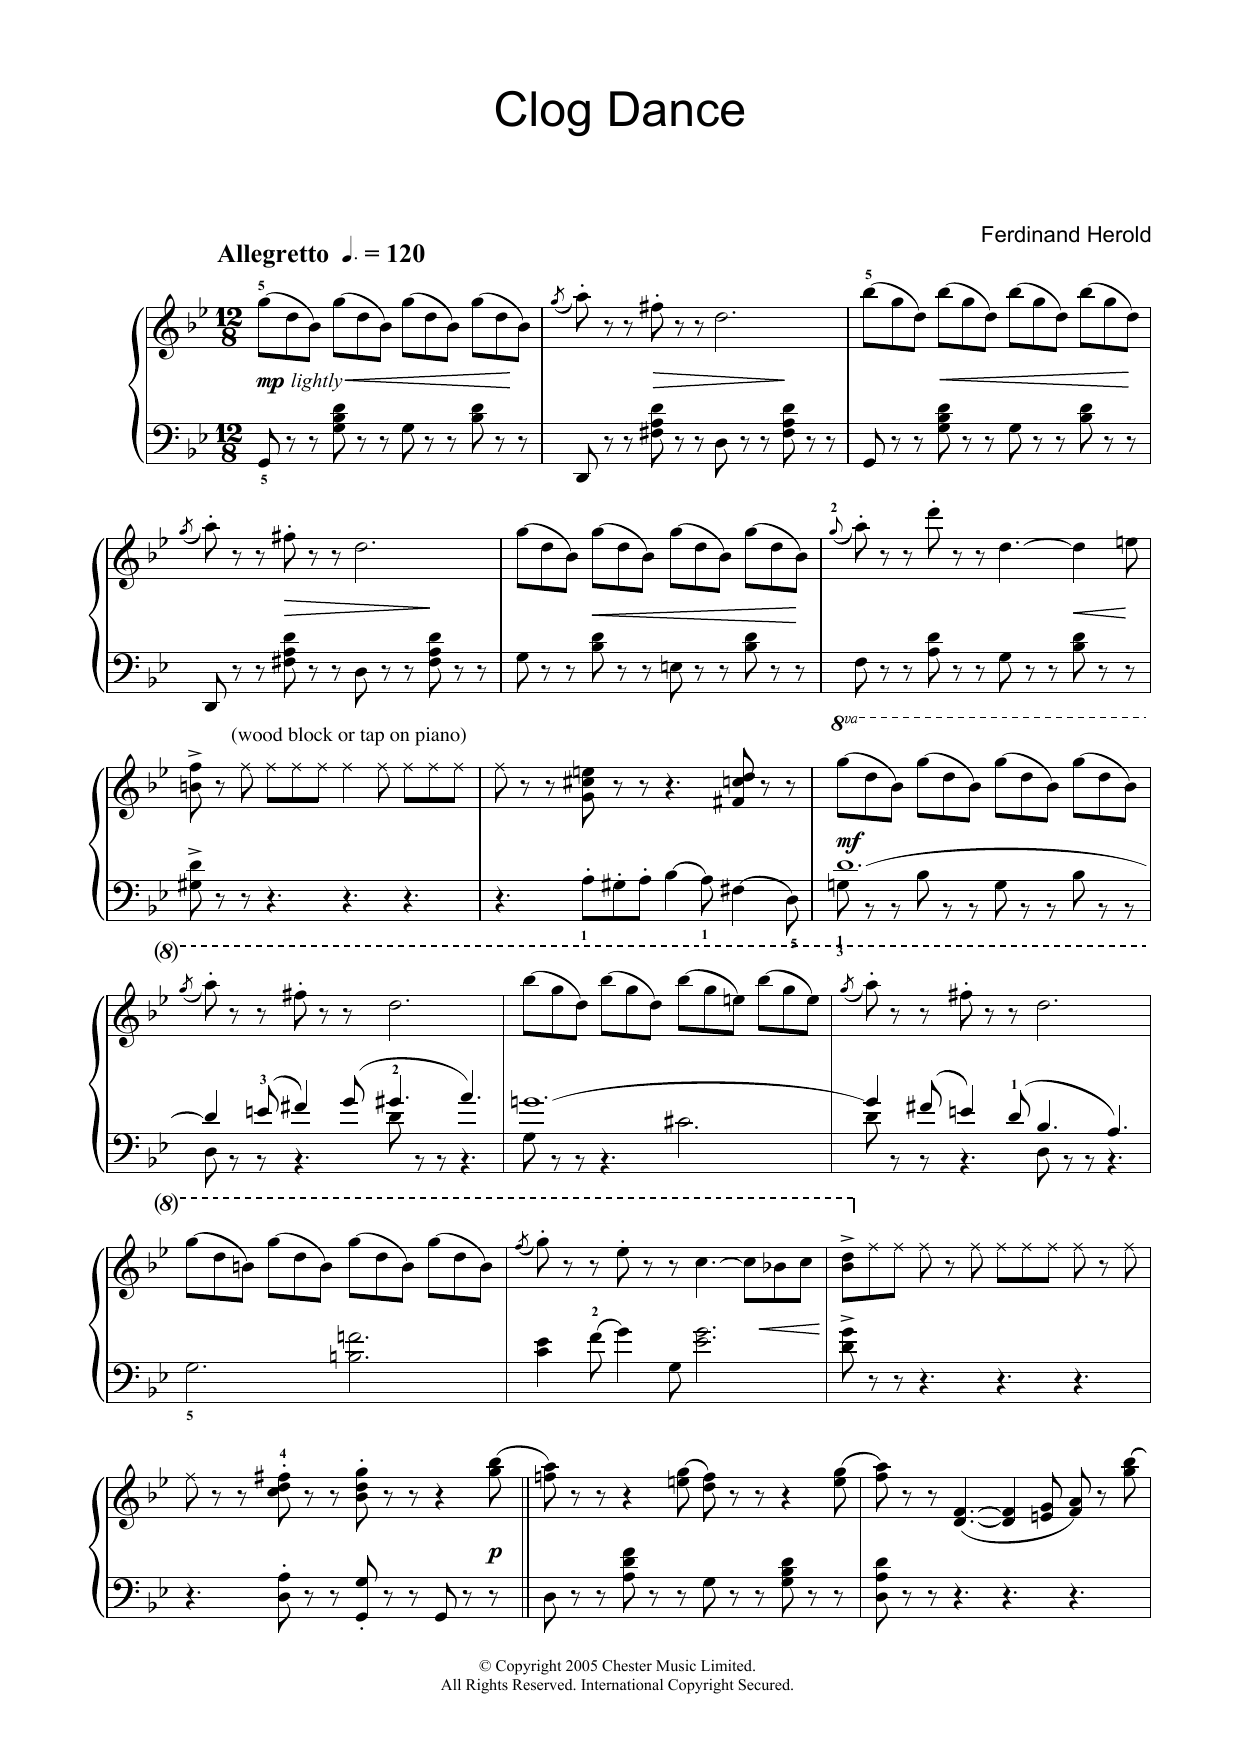 Ferdinand Herold Clog Dance from La Fille Mal Gardée sheet music preview music notes and score for Piano including 3 page(s)